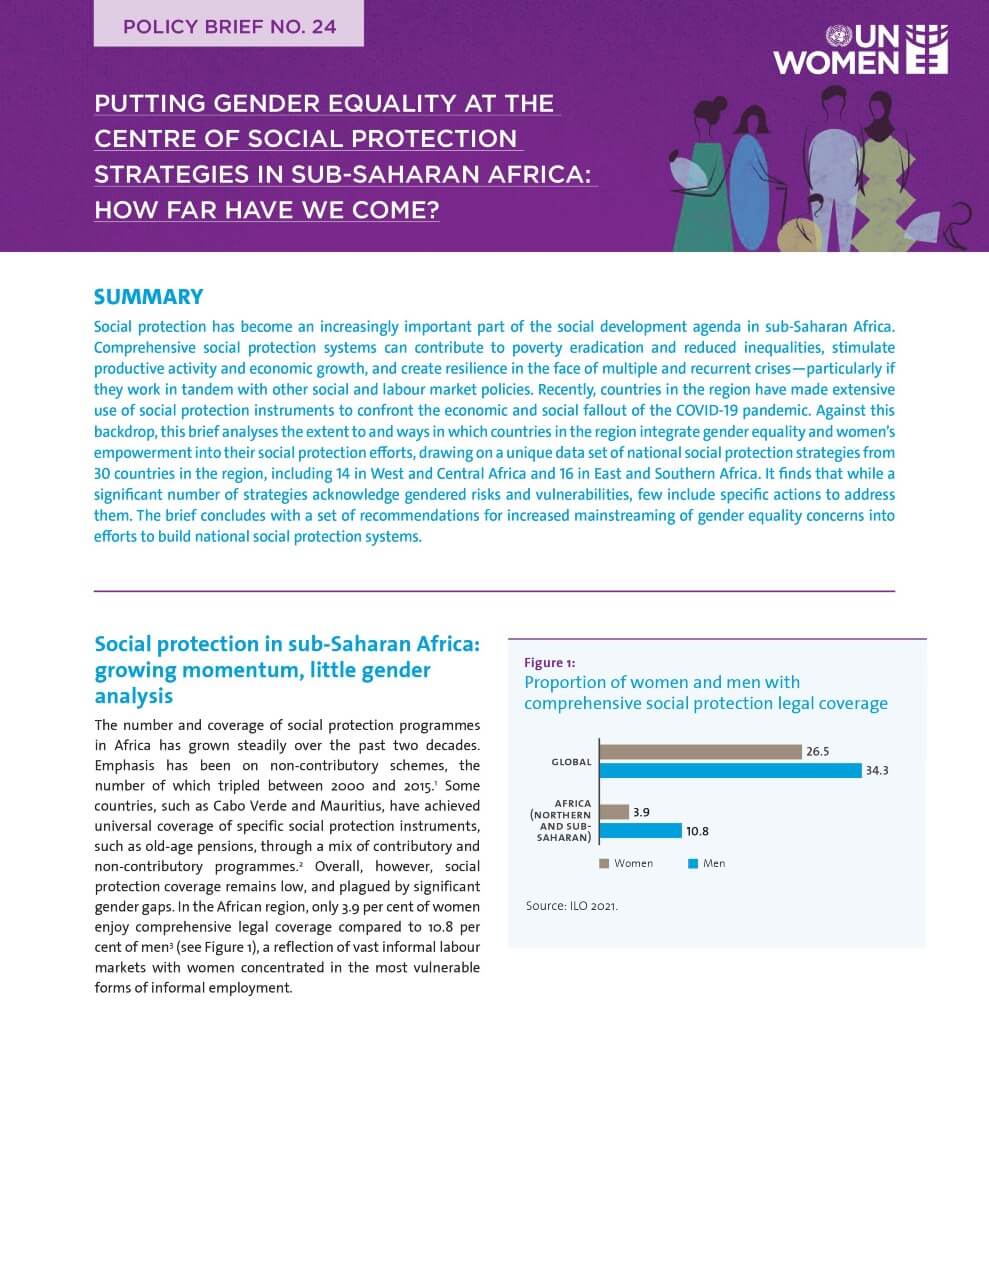 Putting gender equality at the centre of social protection strategies in sub-Saharan Africa: Putting gender equality at the centre of social protection strategies in sub-Saharan Africa: How far have we come?